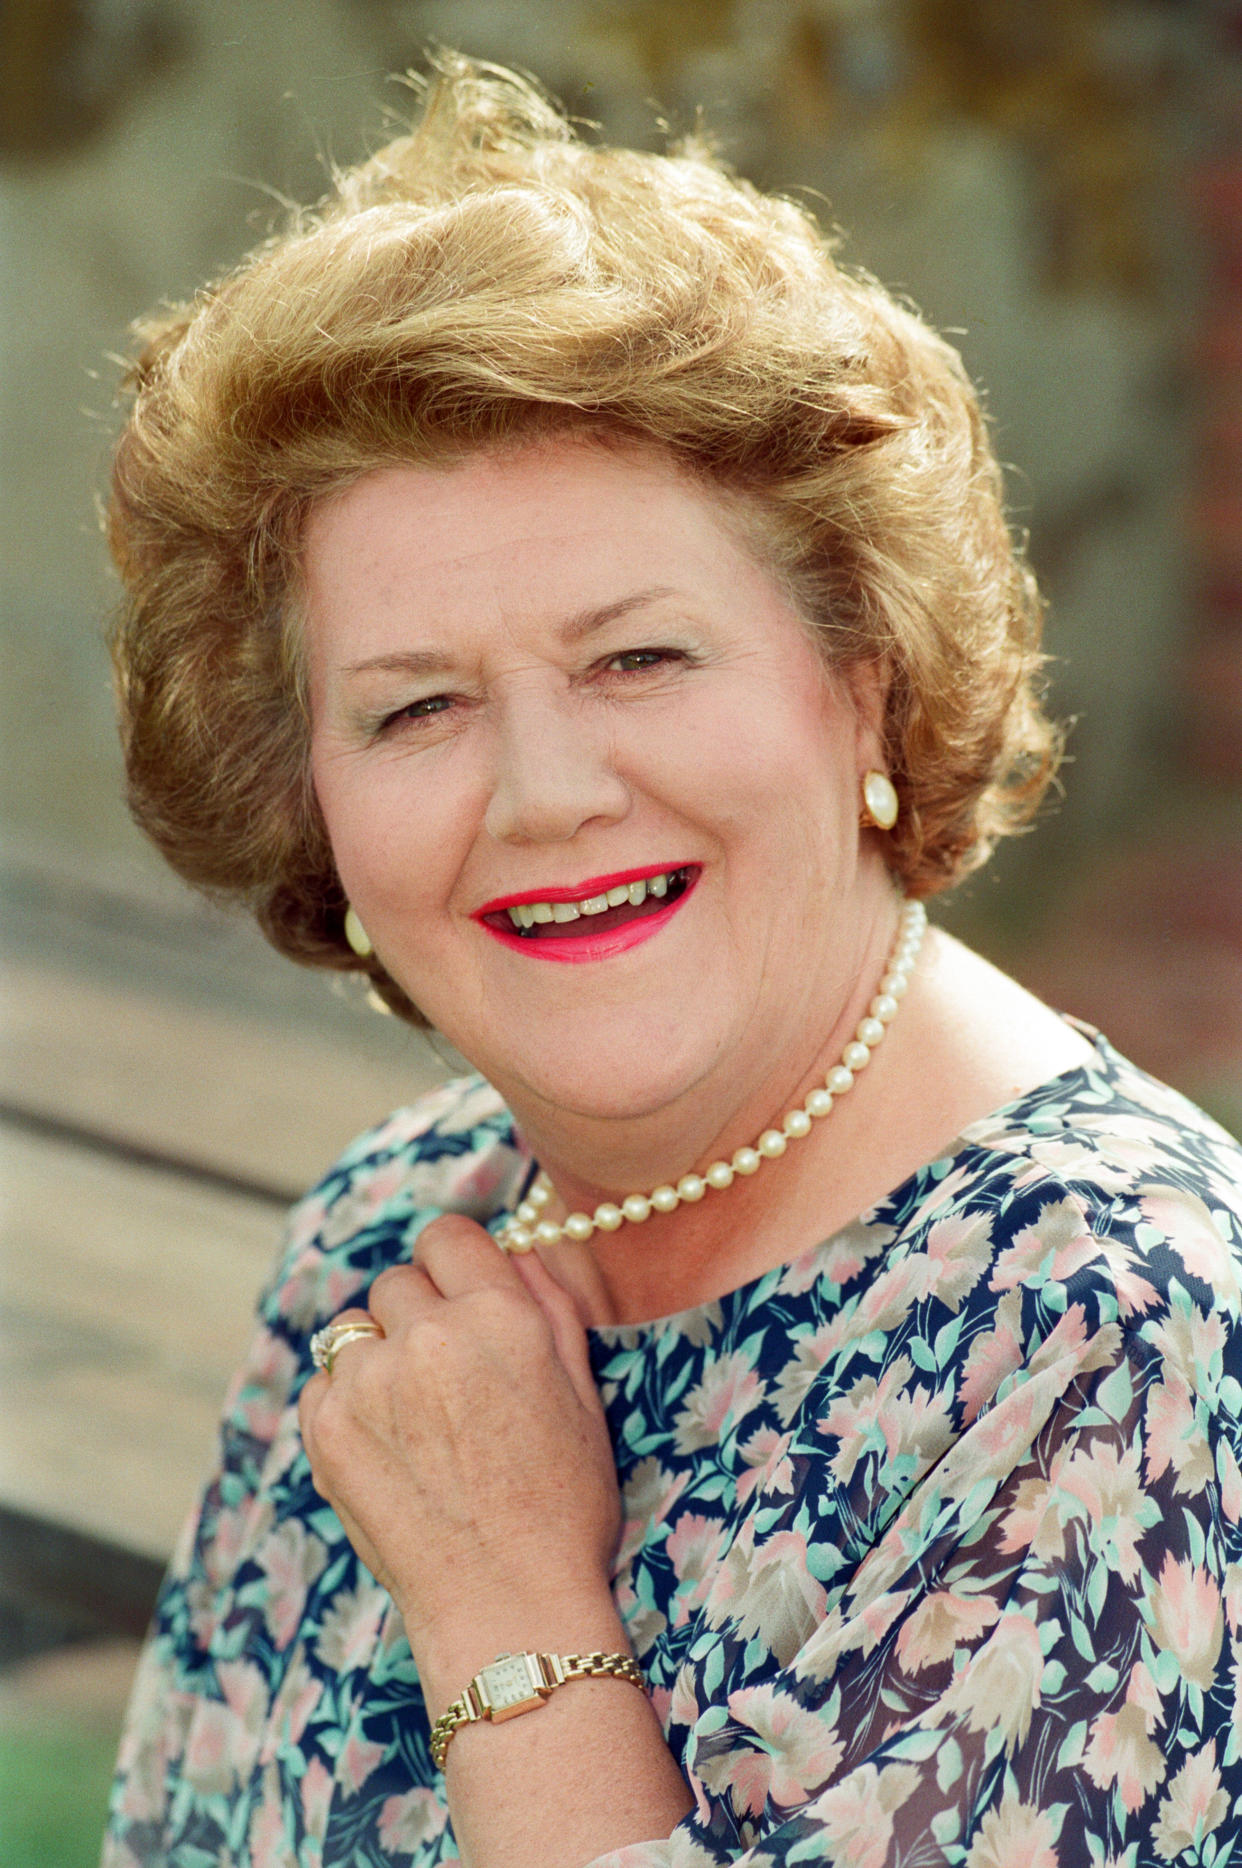 Photocall for new BBC production 'Keeping up Appearances'. Patricia Routledge, 2nd August 1992. (Photo by Dick Williams/Mirrorpix/Getty Images)